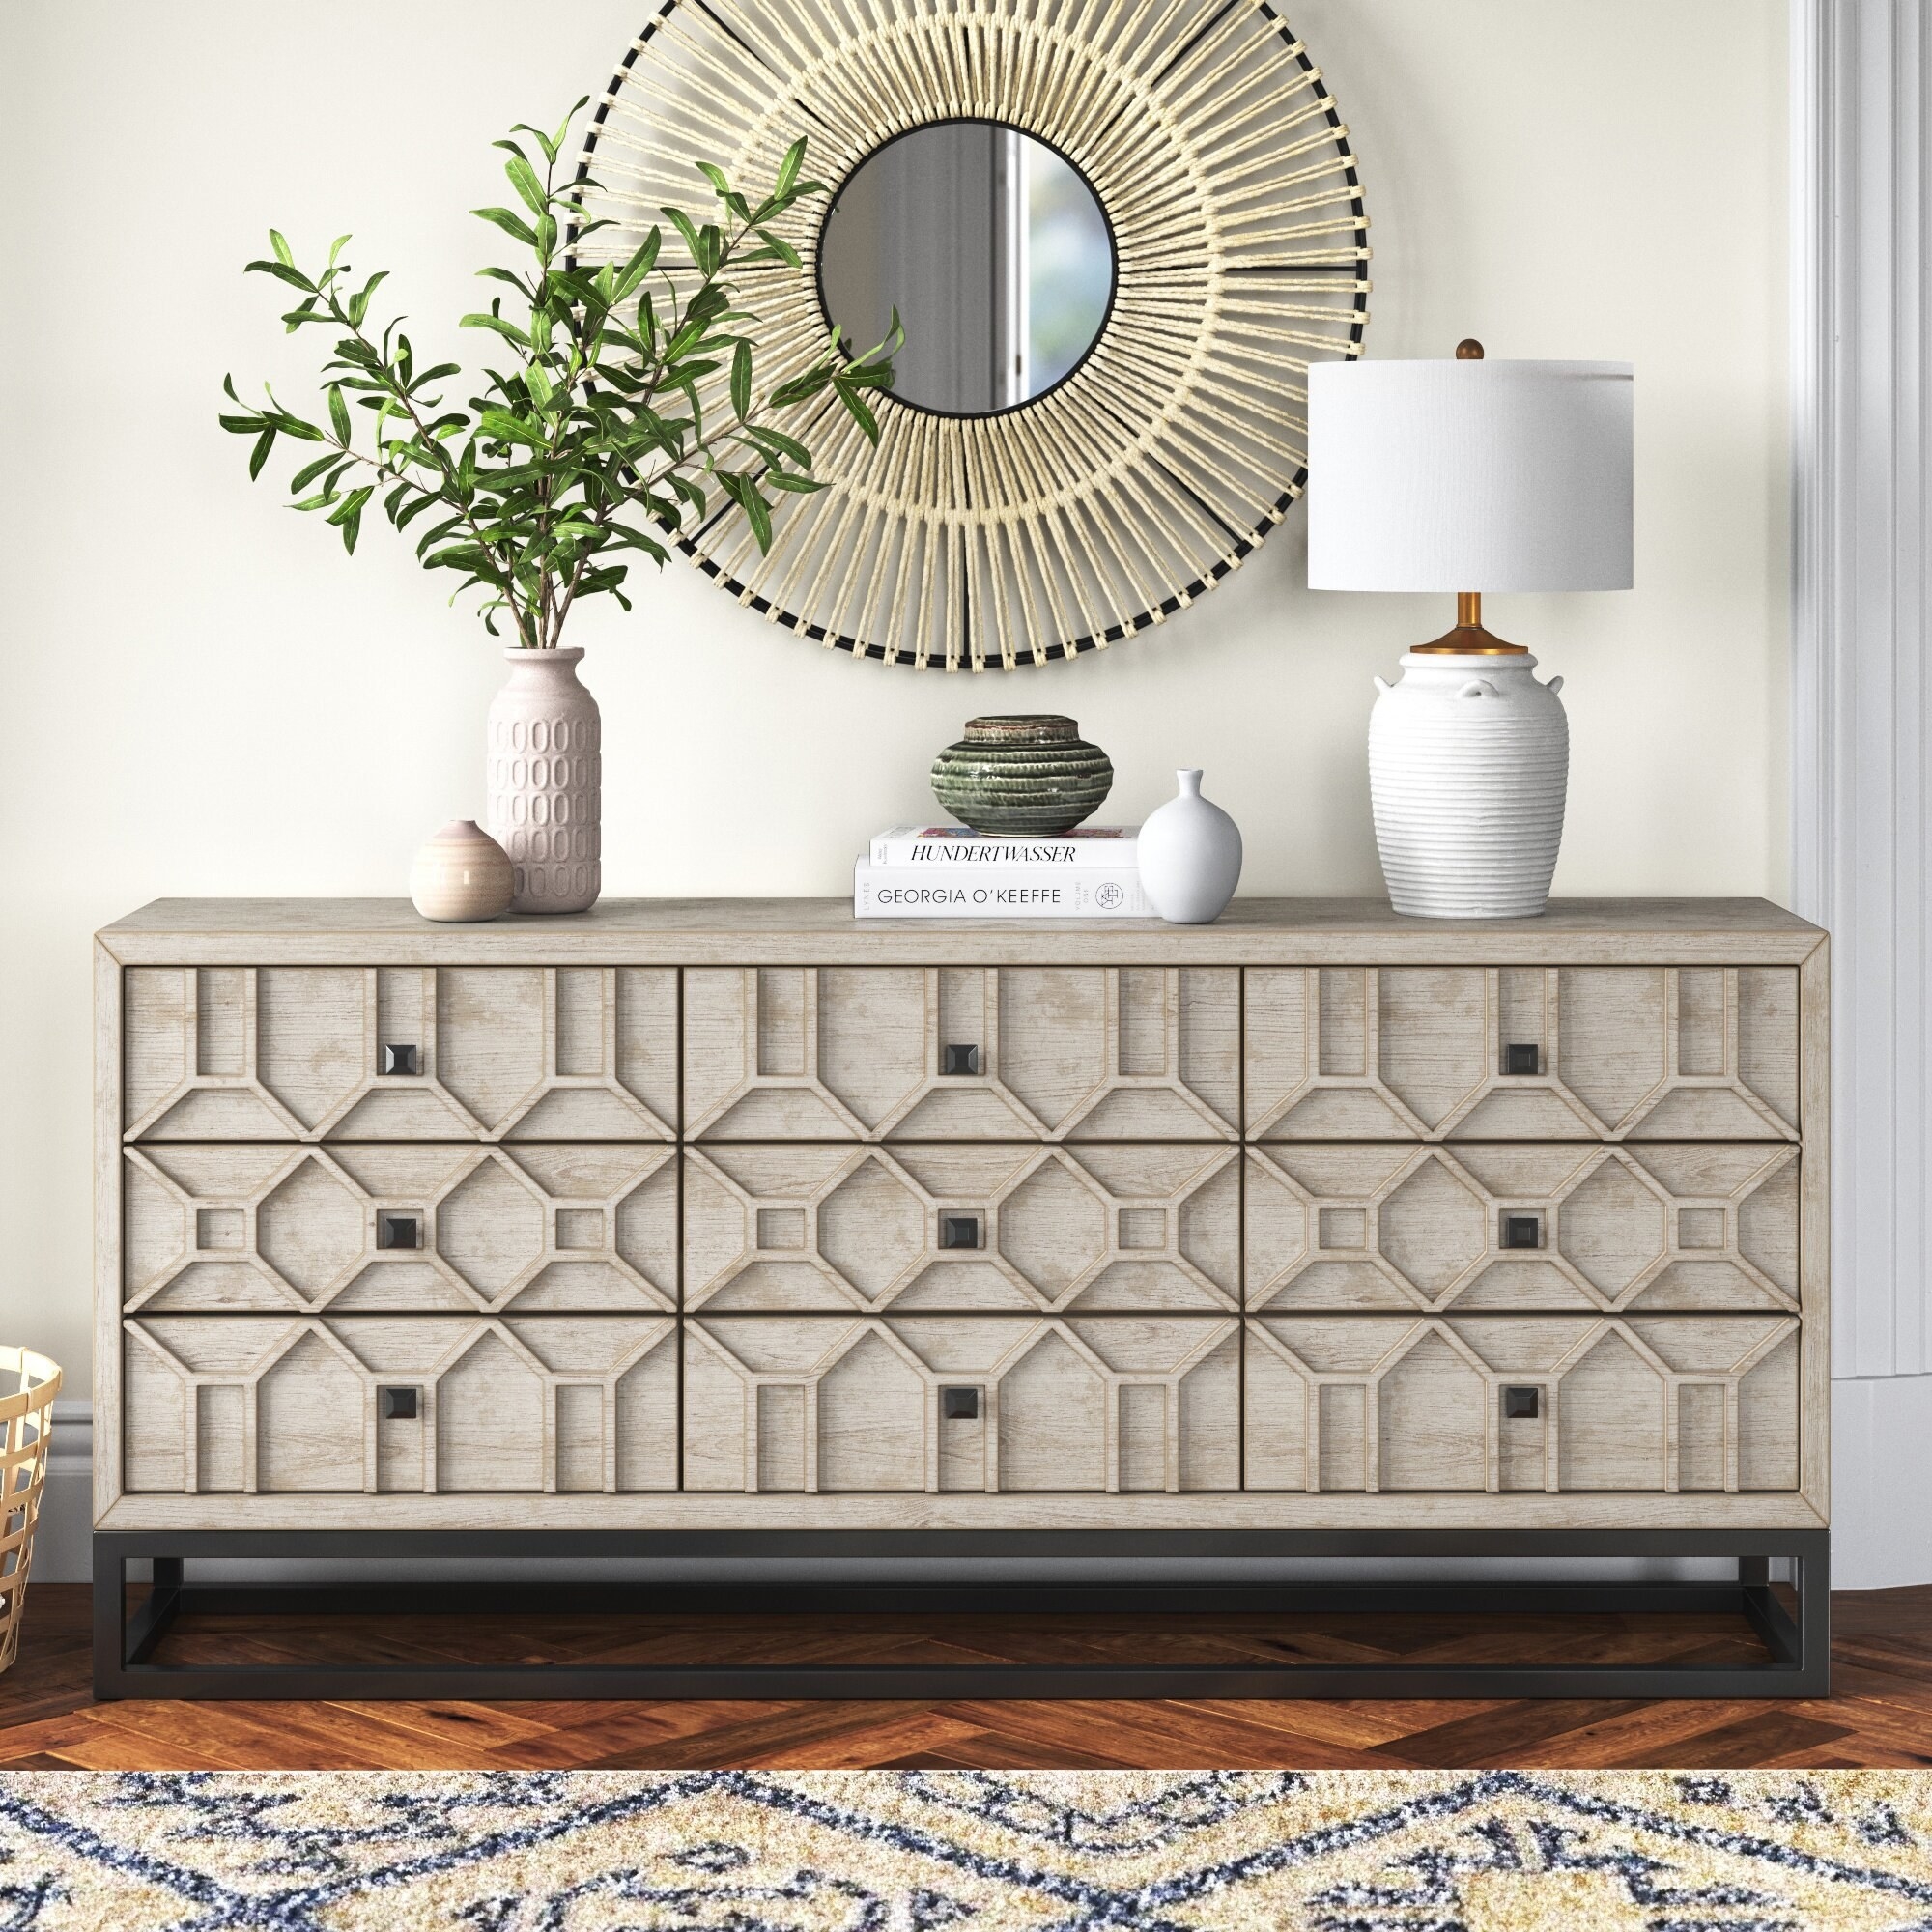 Image of the light-colored dresser